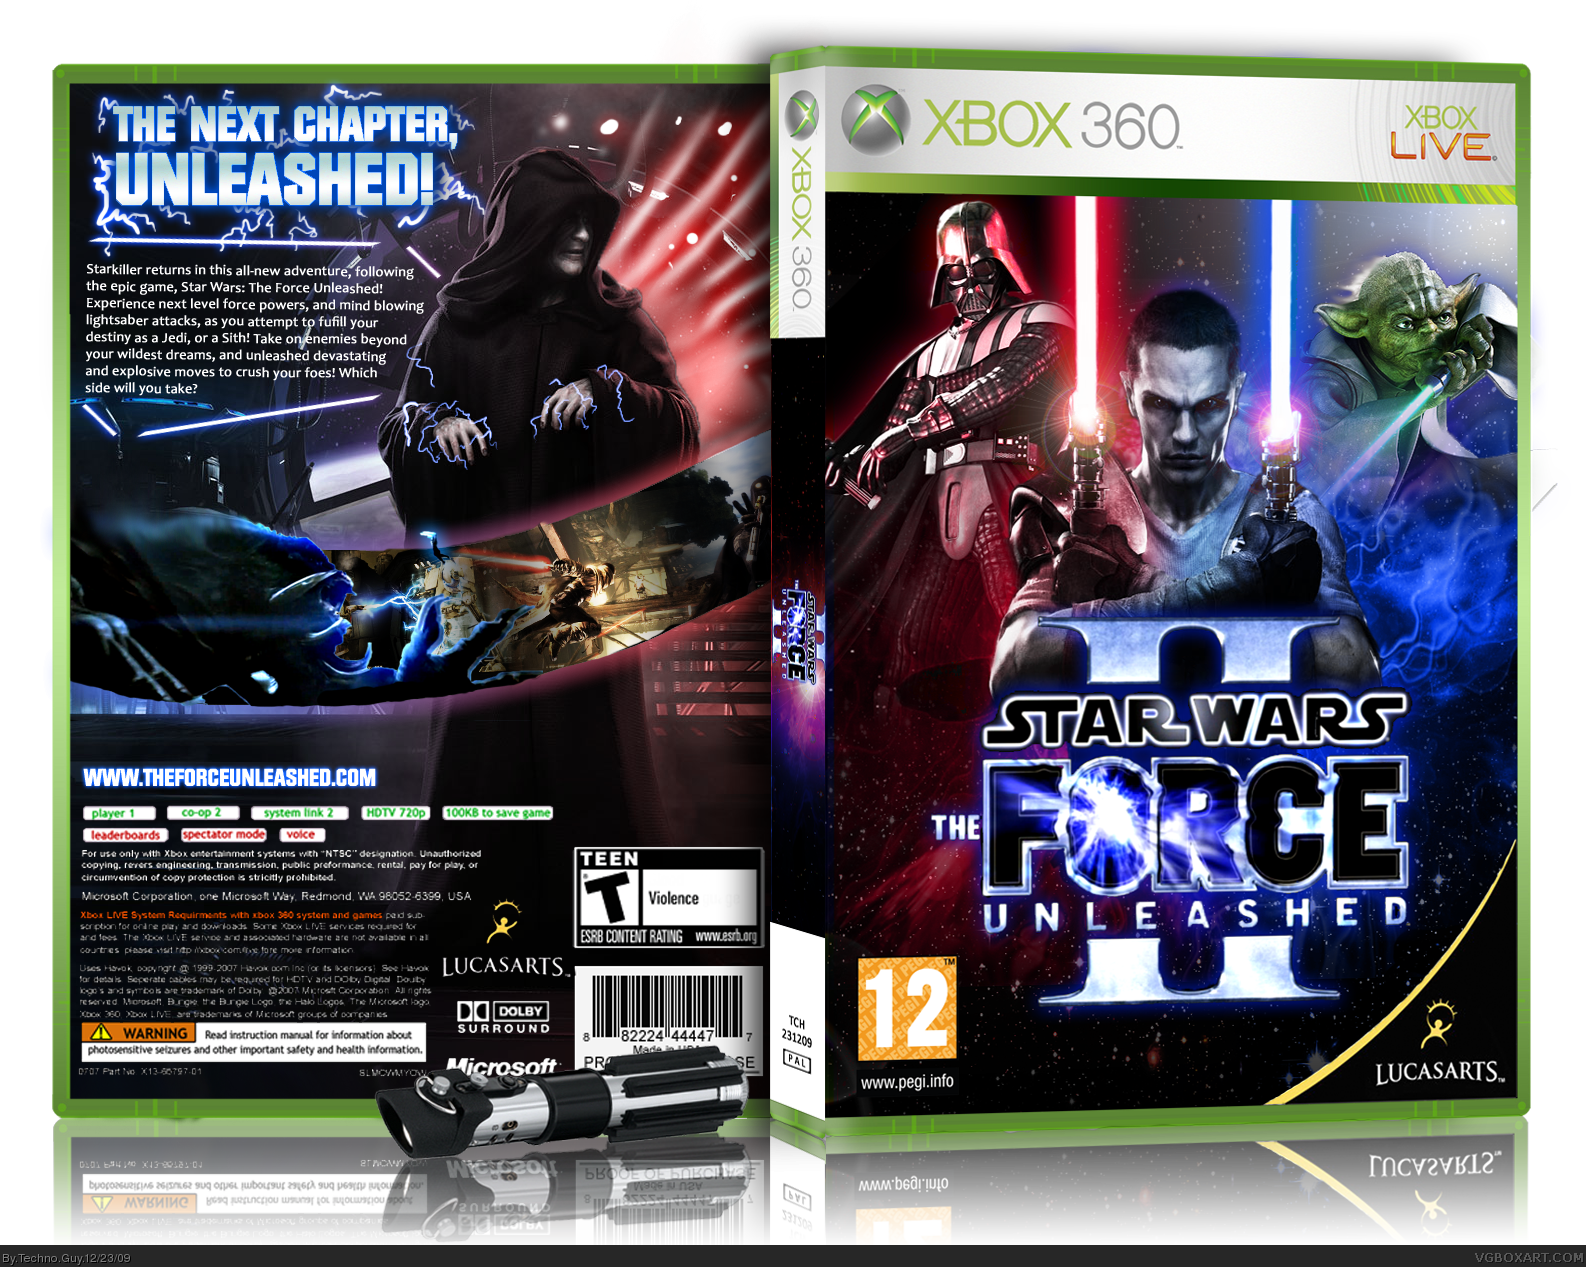 Force unleashed Xbox 360. Стар ВАРС Xbox 360. Star Wars Force unleashed PC обложка. Star Wars the Force unleashed 2 обложка PC.